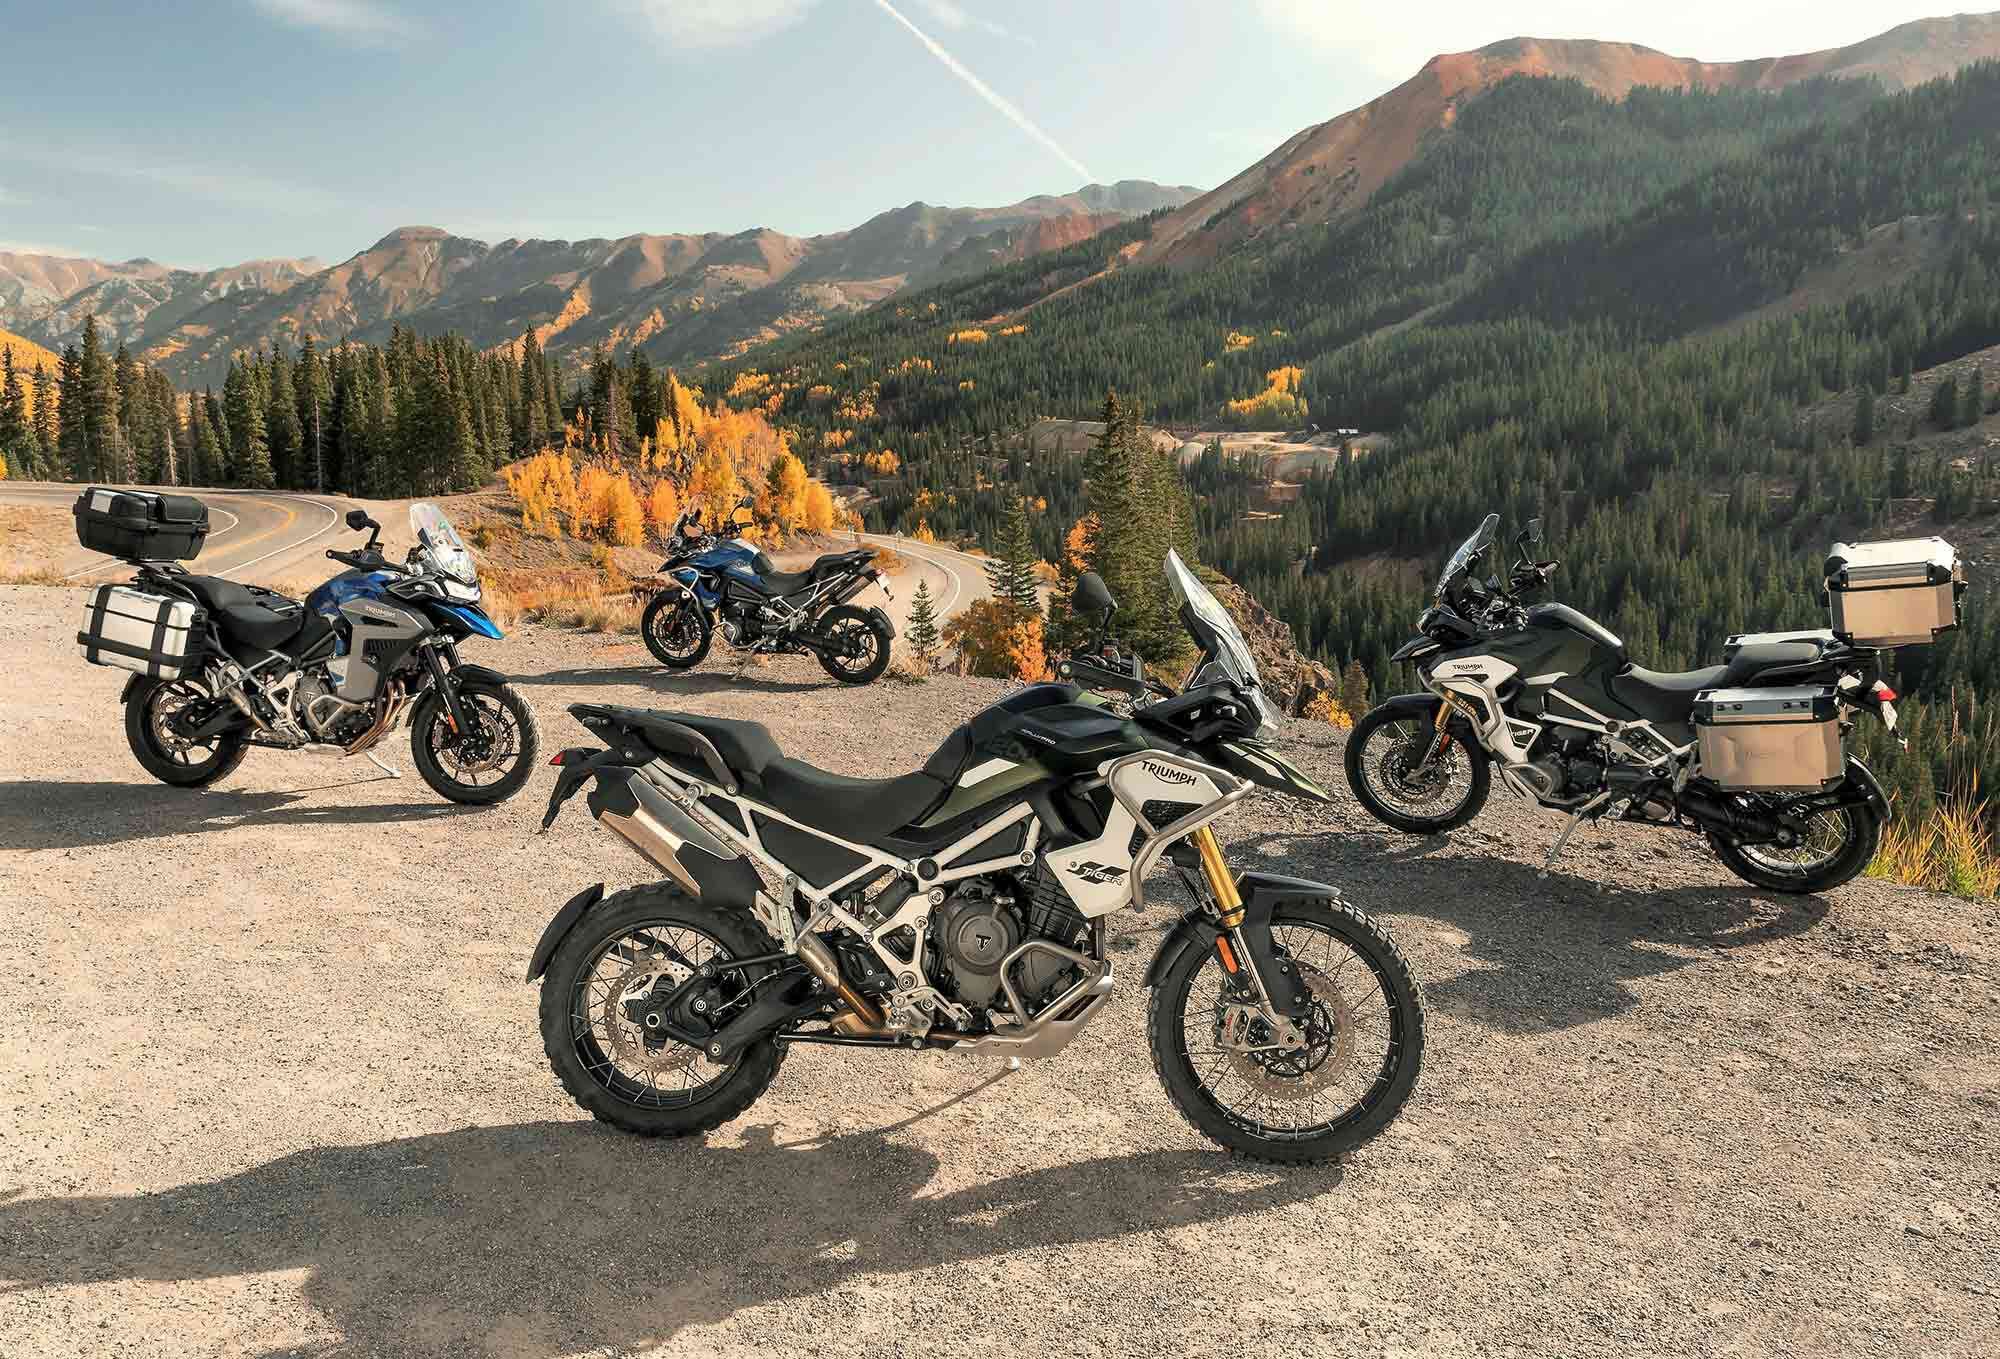 Triumph’s new Tiger 1200 family consists of five models, with the Tiger 1200 GT as the base (in the background); the 1200 Rally Pro is in the foreground.